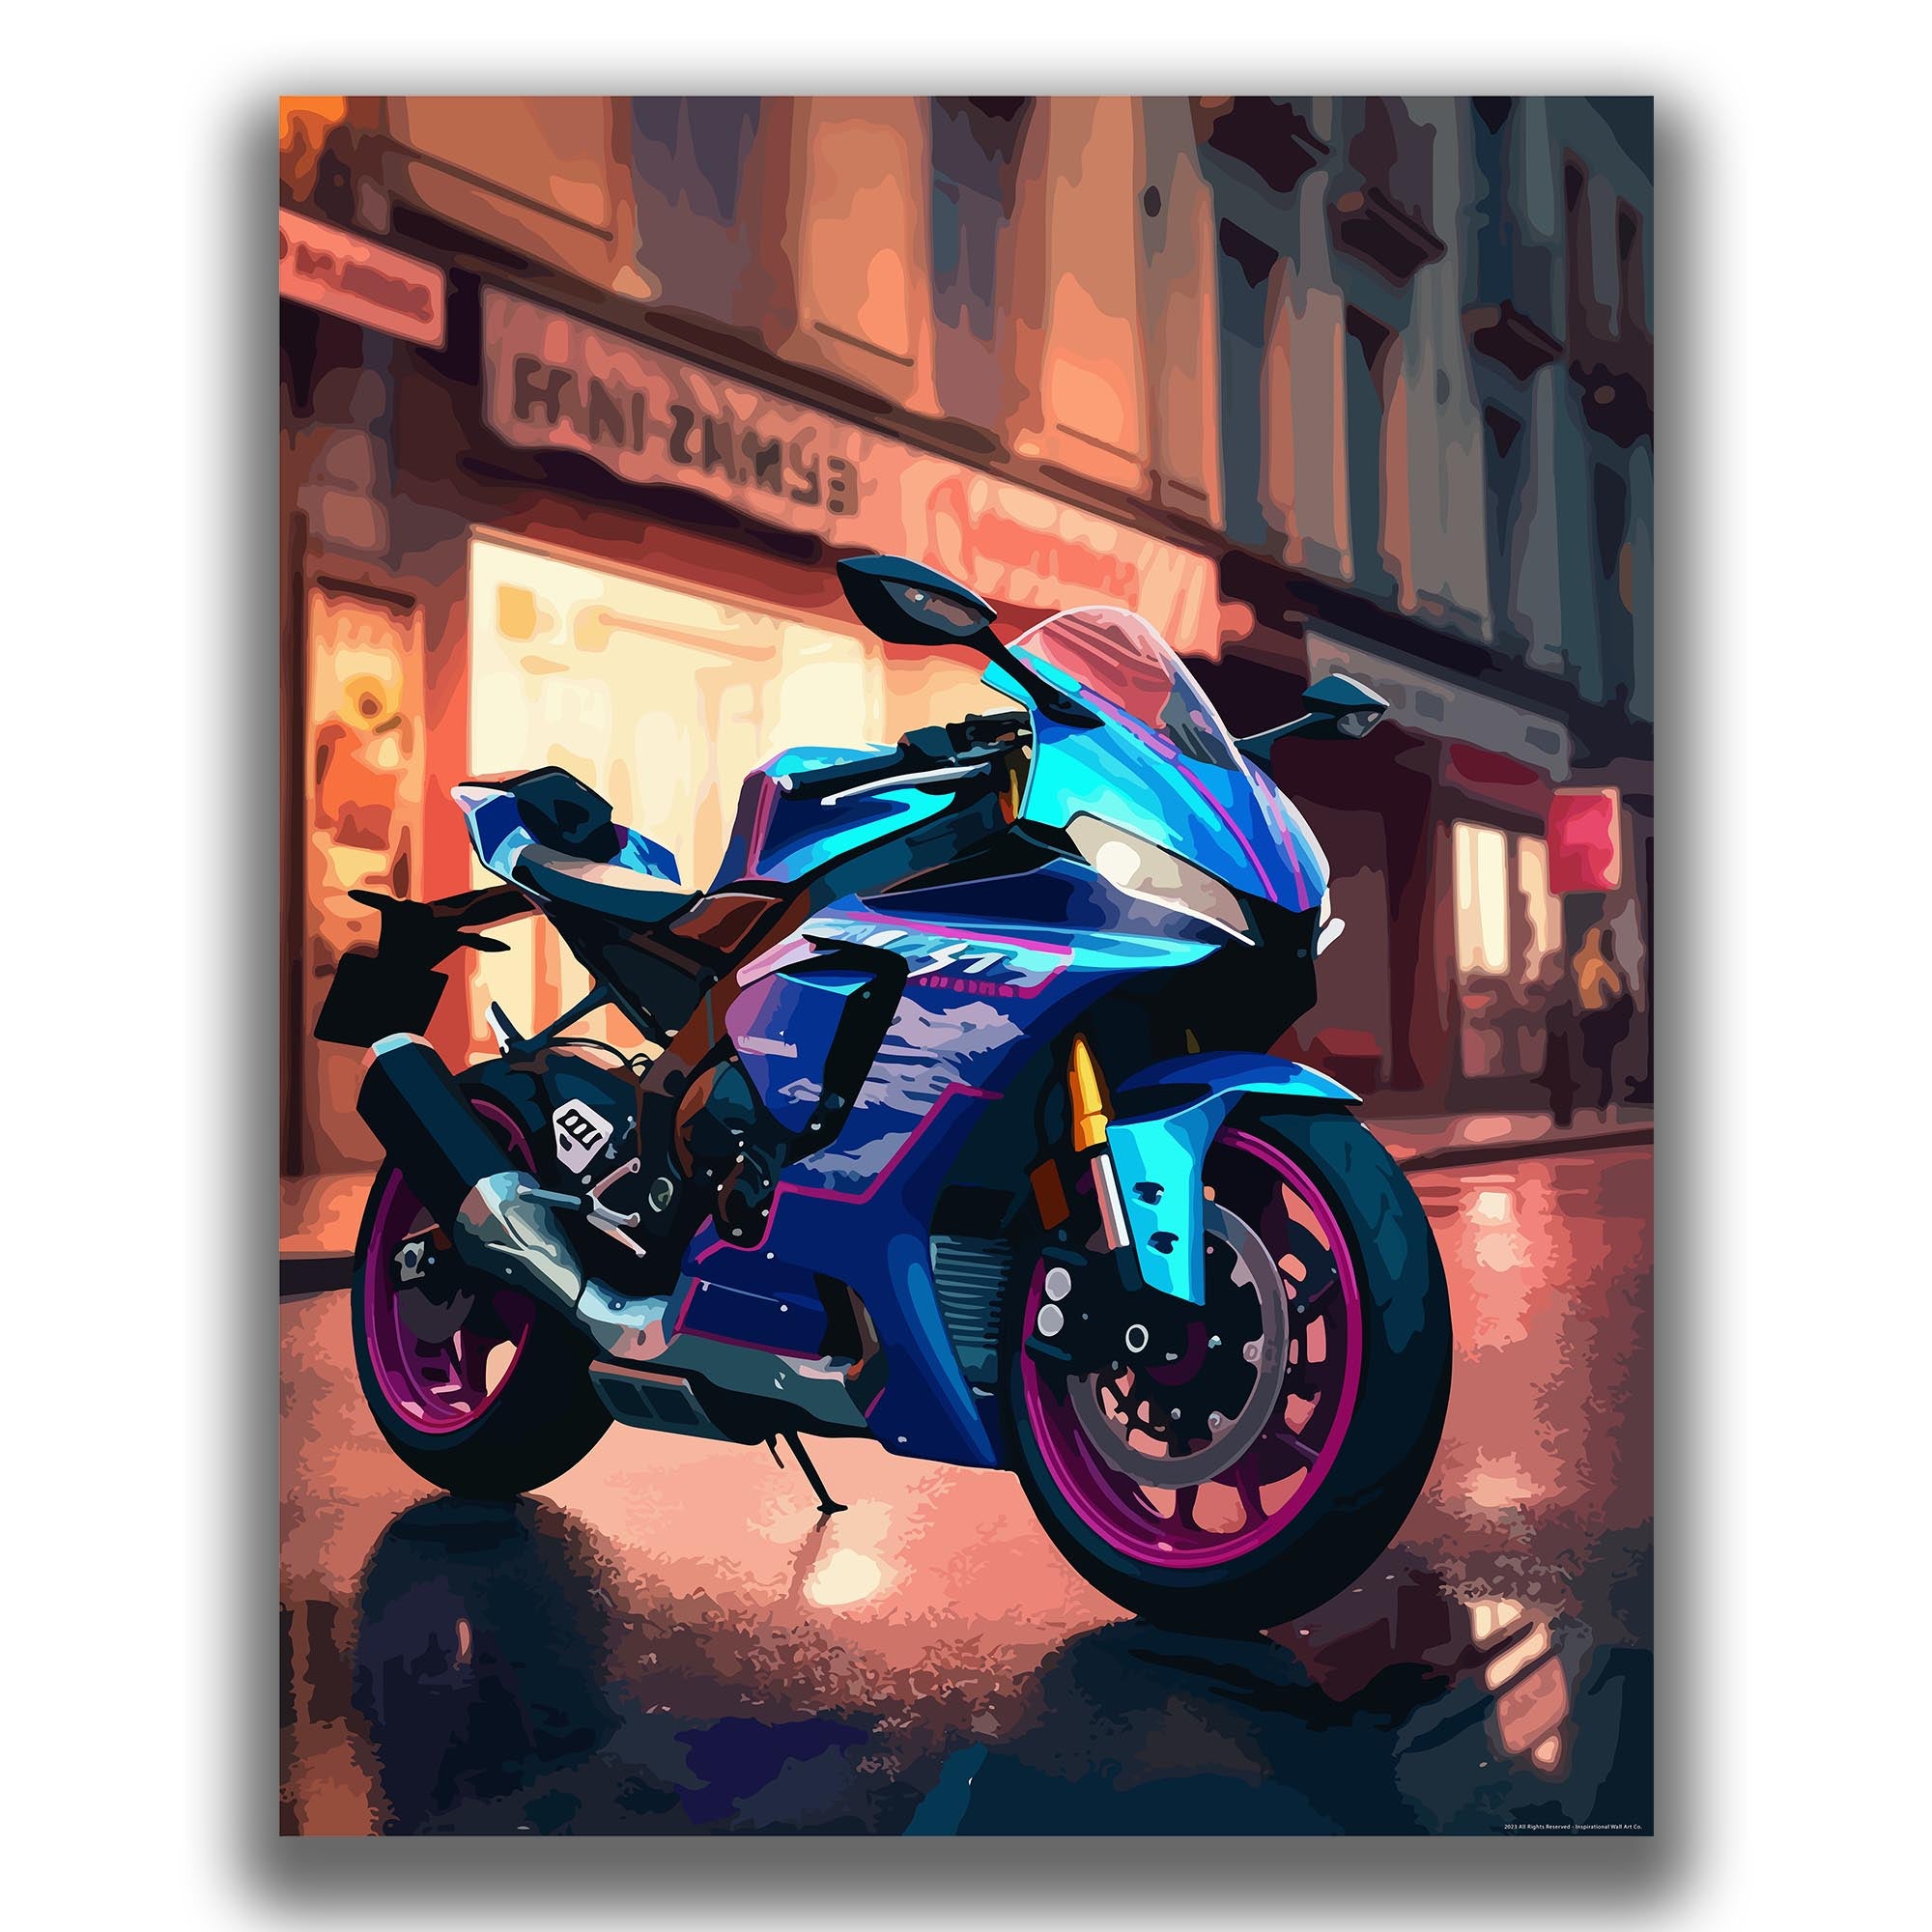 Gripping - Motorcycle Poster